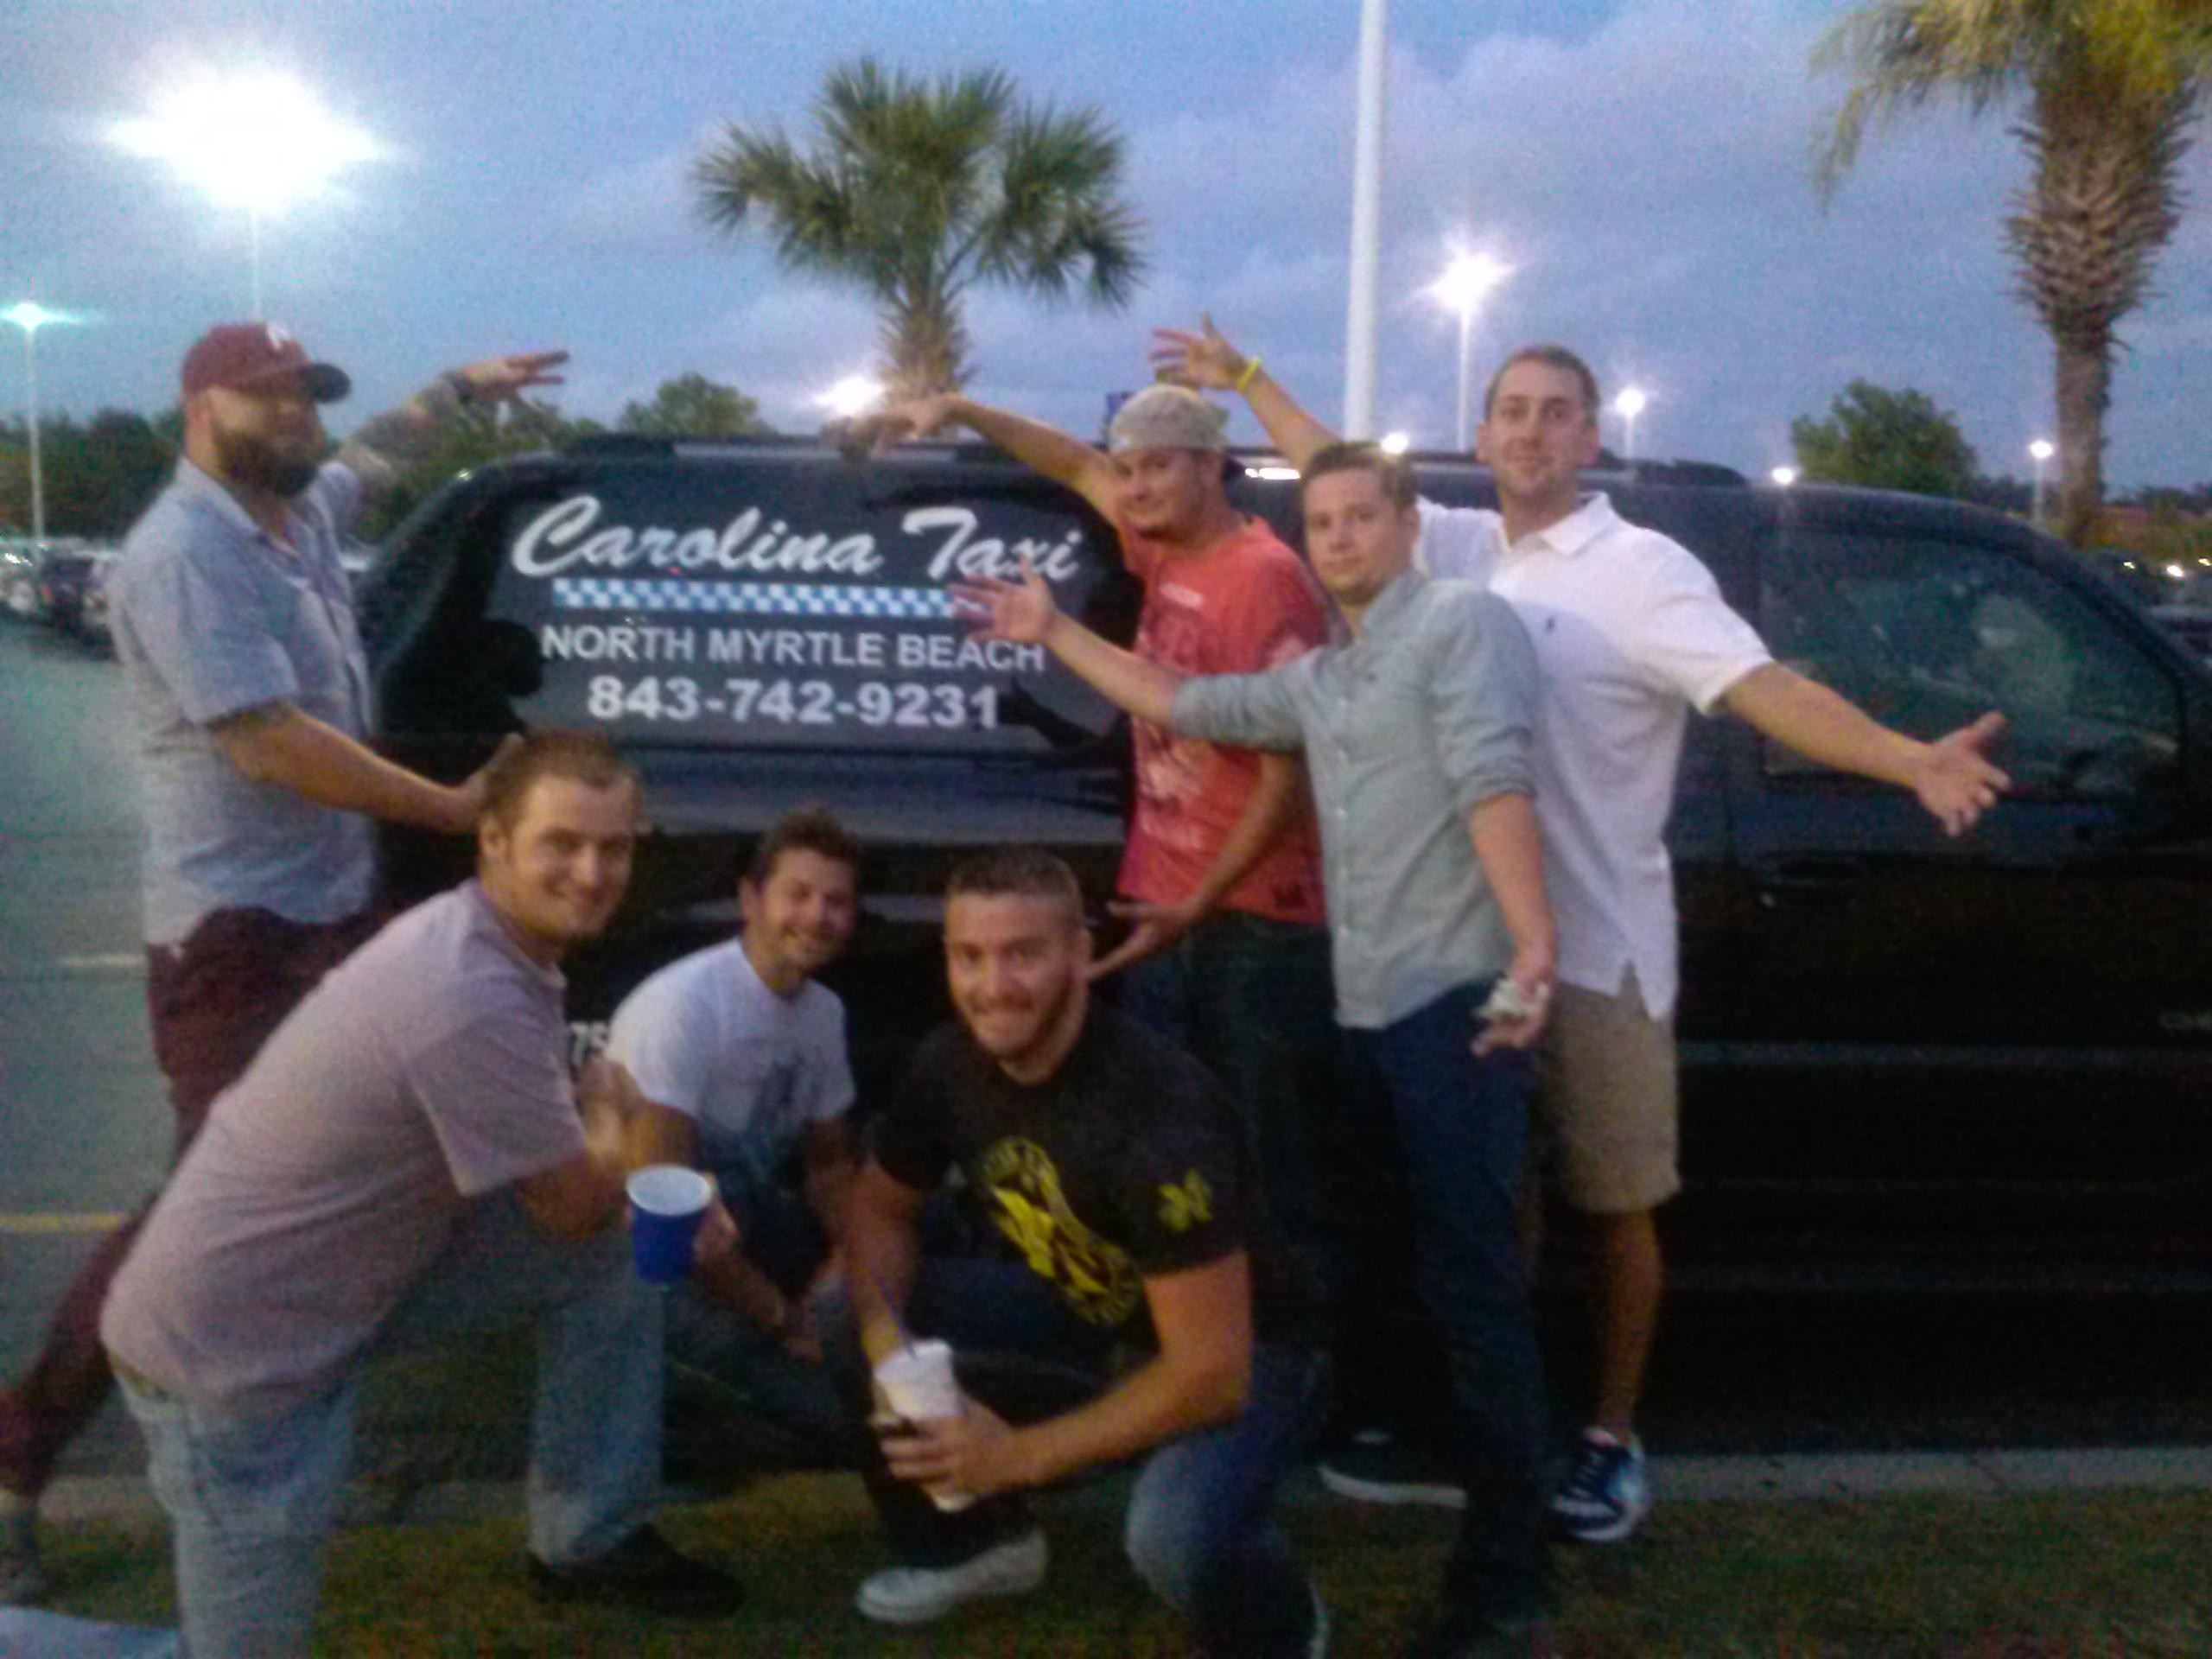 Myrtle Beach Bachelor Party Ideas
 Carolina Taxi North Myrtle Beach Cab and Airport Shuttle